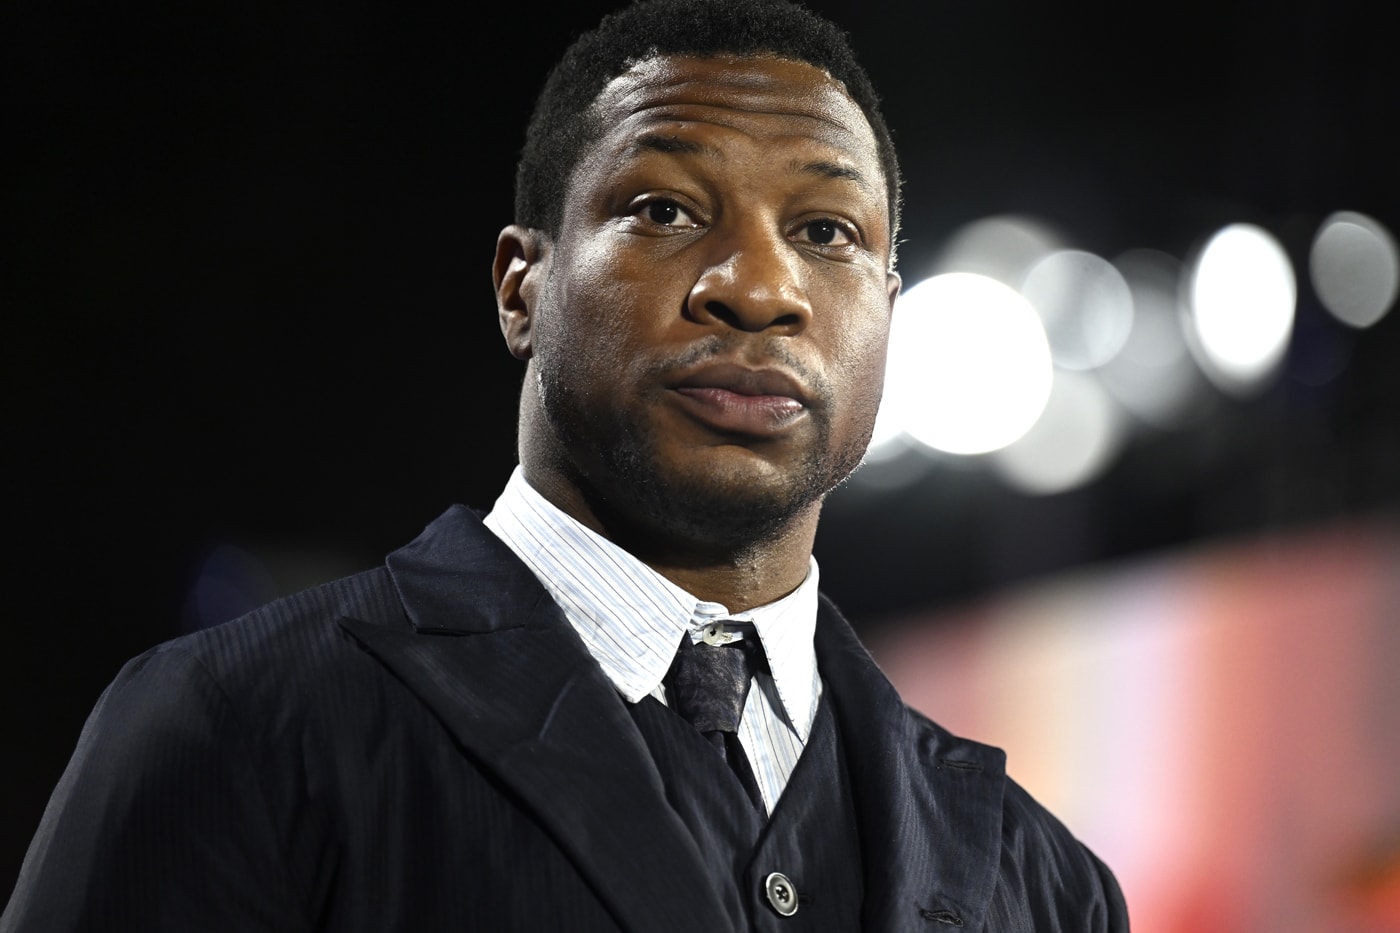 Jonathan Majors Charged With Assault and Harassment Following Arrest alleged domestic dispute assault arrested new york city creed iii michael b jordan